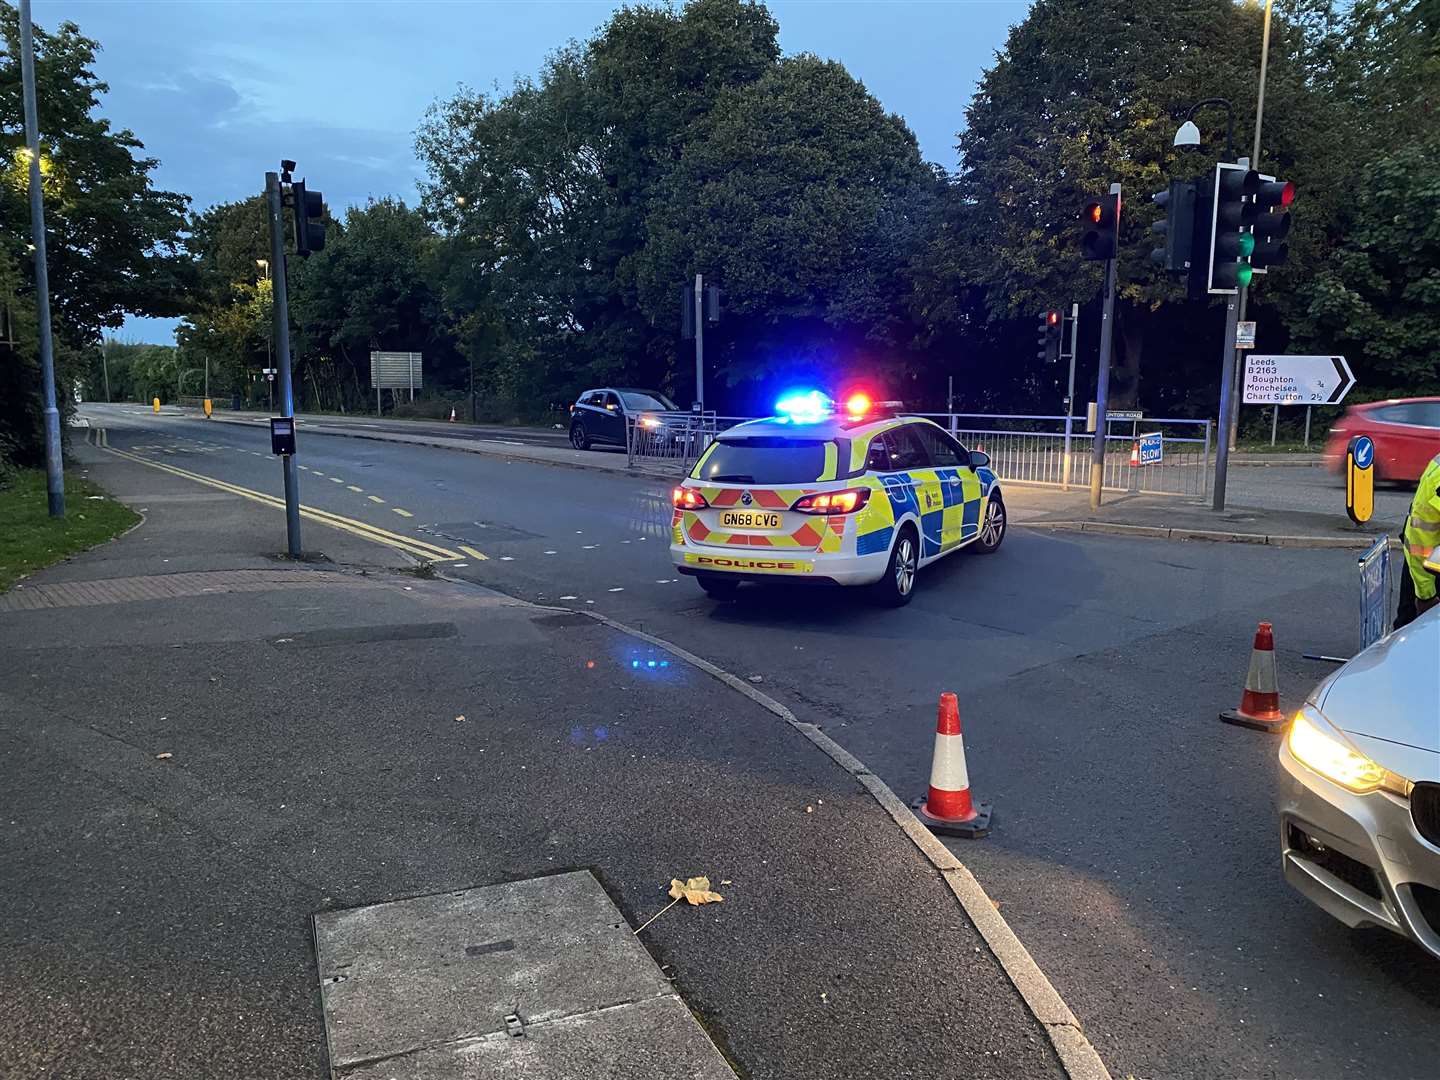 Police have closed the A229 Linton Road